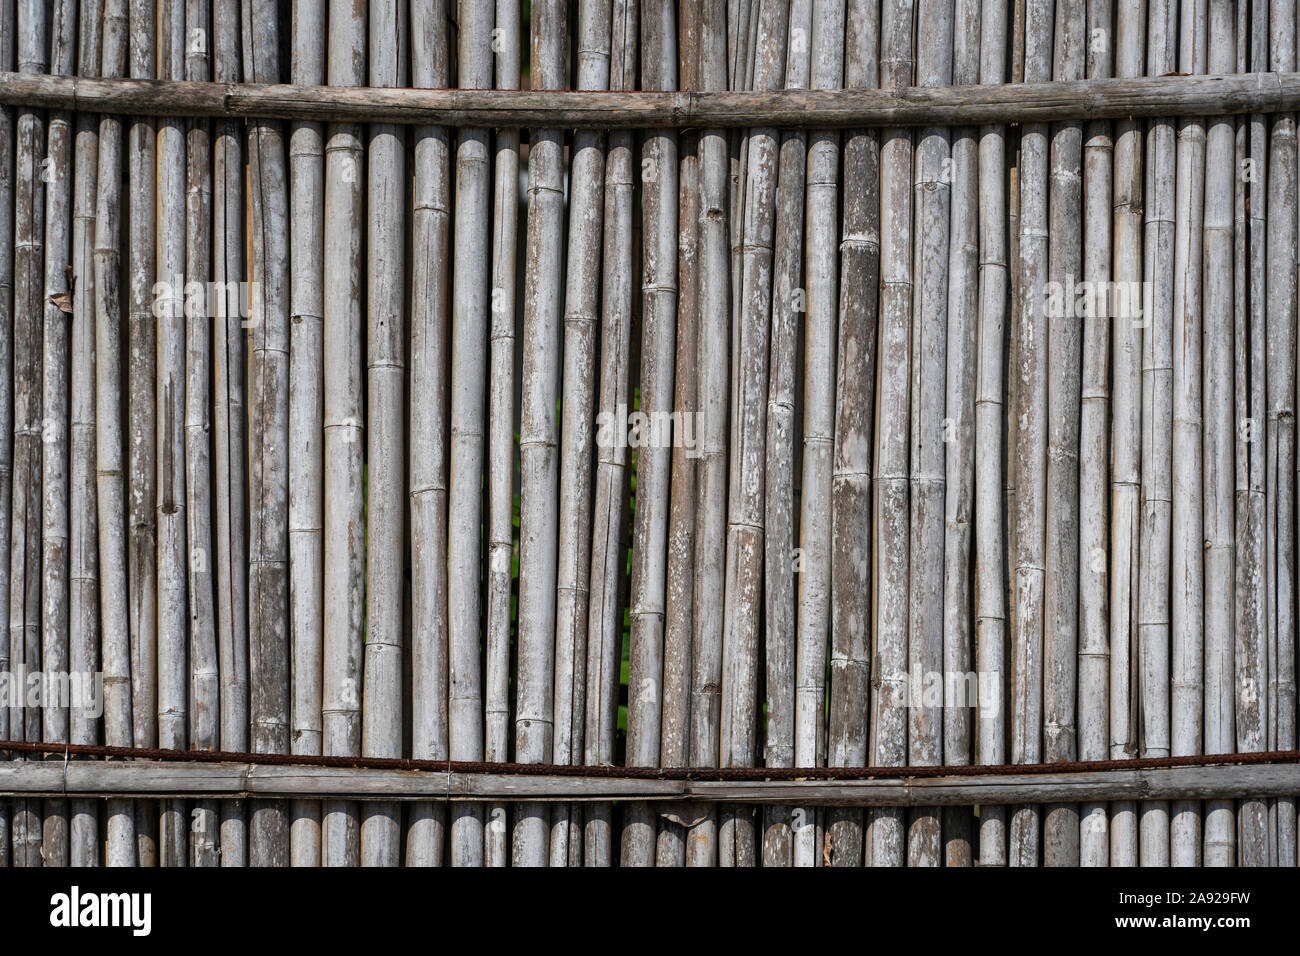 Dry bamboo fence texture or background. Eco natural background concept. Stock Photo